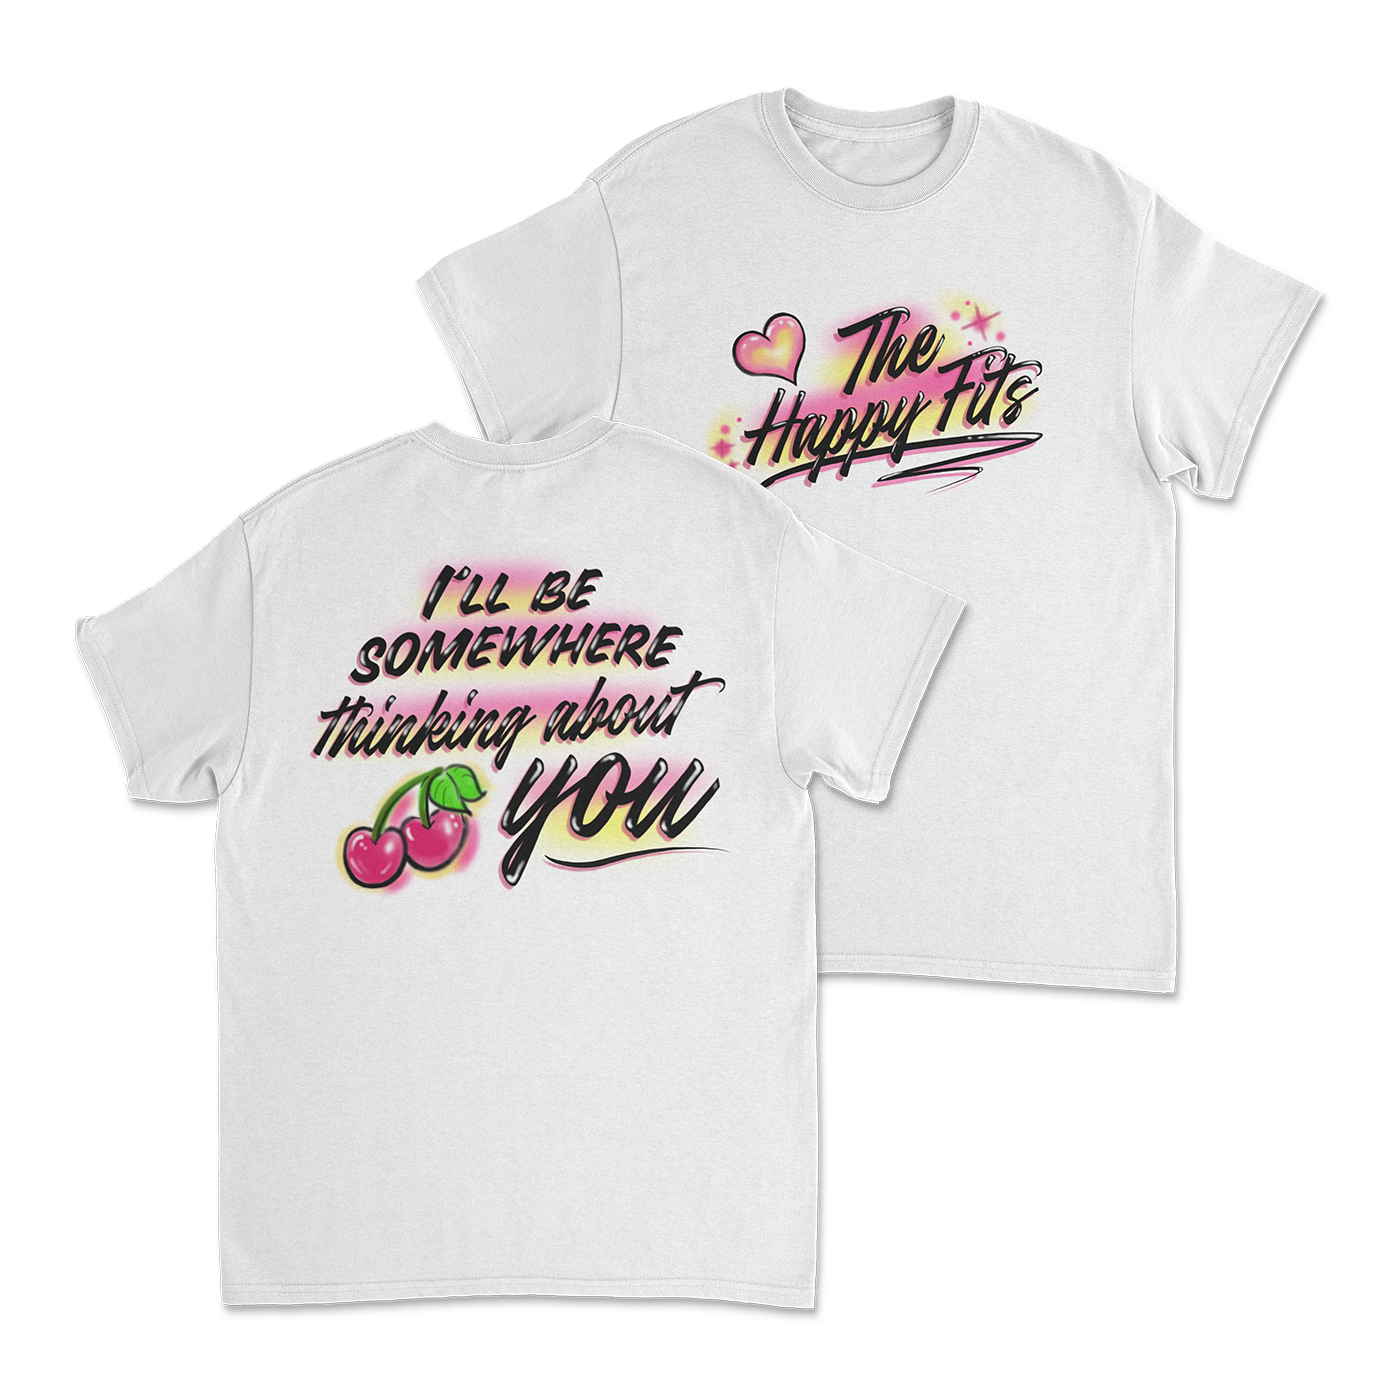 Airbrush V-Day Tee front and back